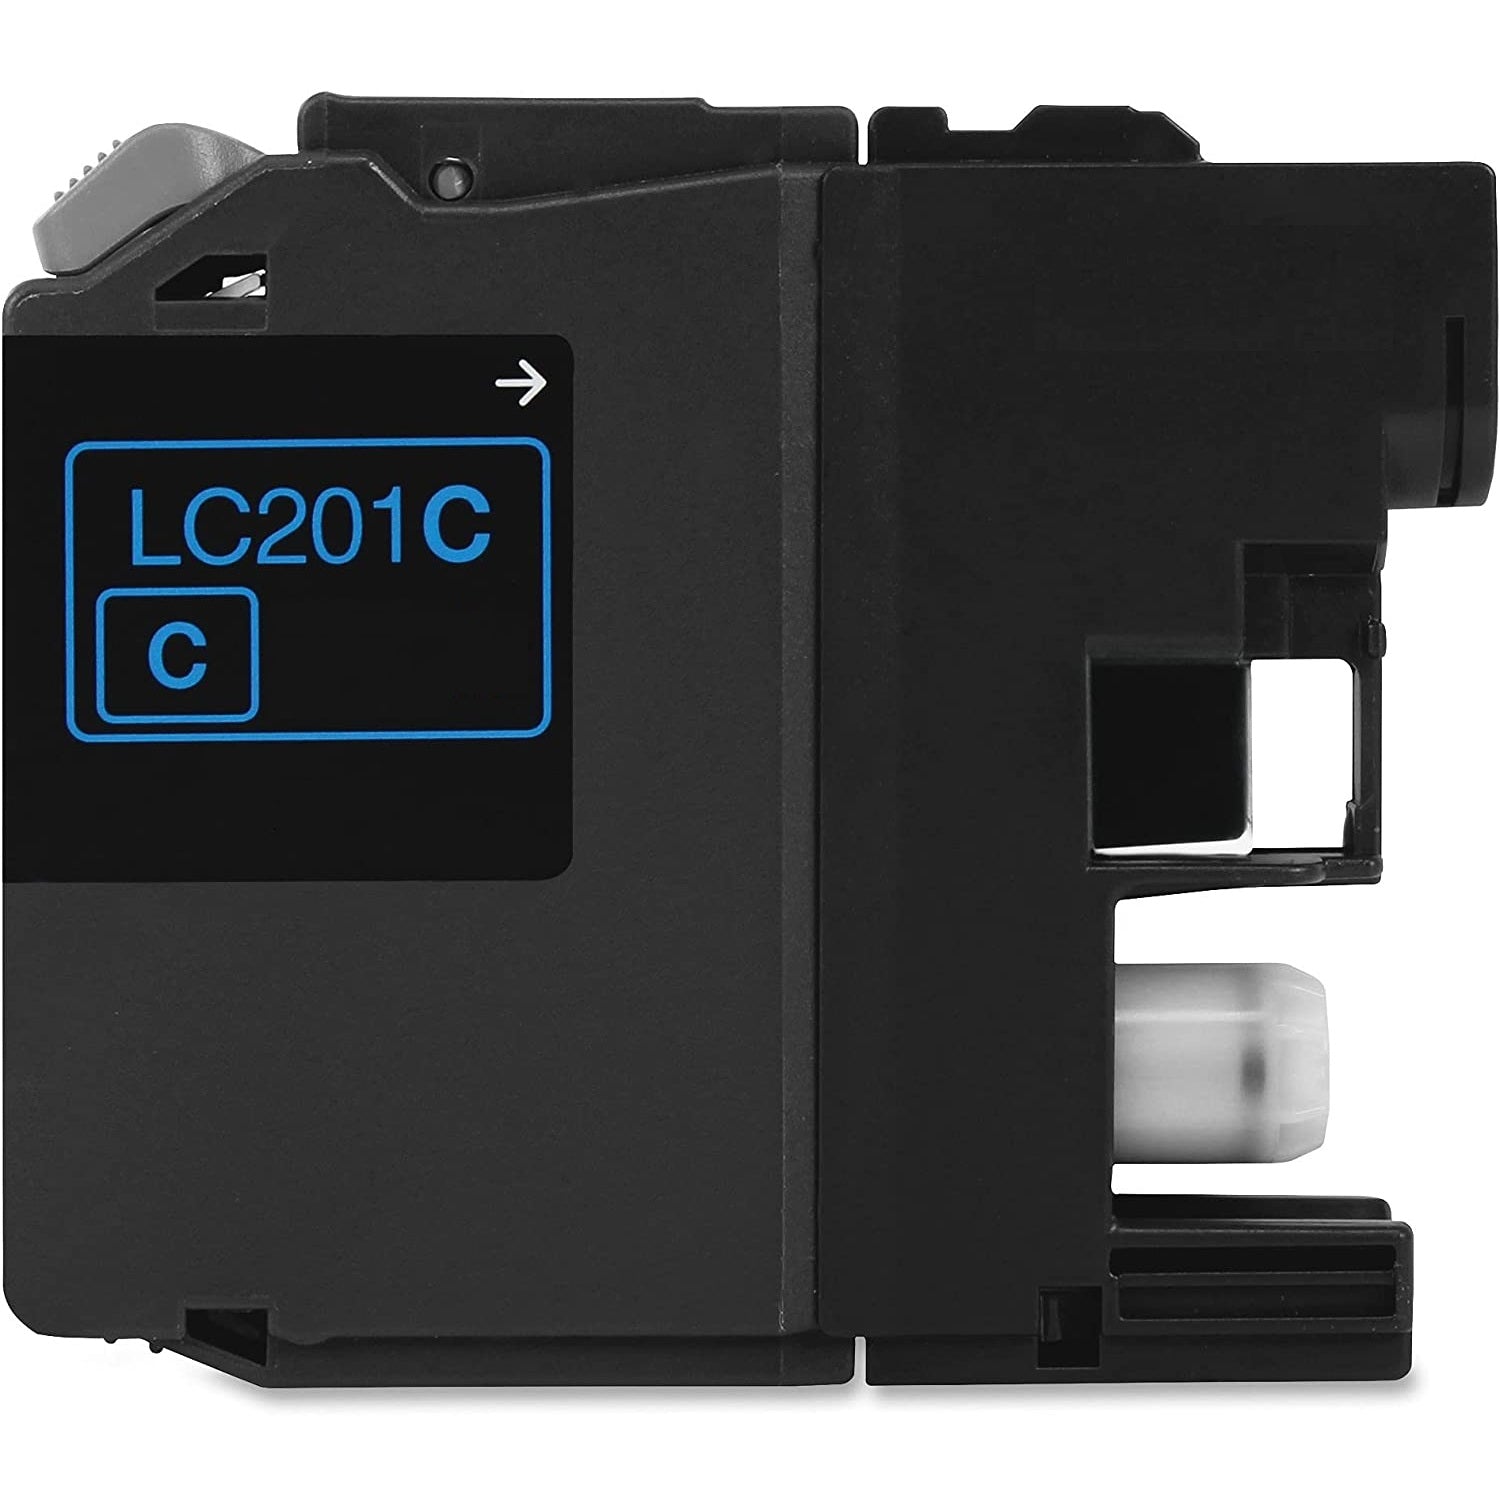 Absolute Toner Compatible Brother LC201 High Yield Cyan Ink Cartridge (LC201CS) Brother Ink Cartridges